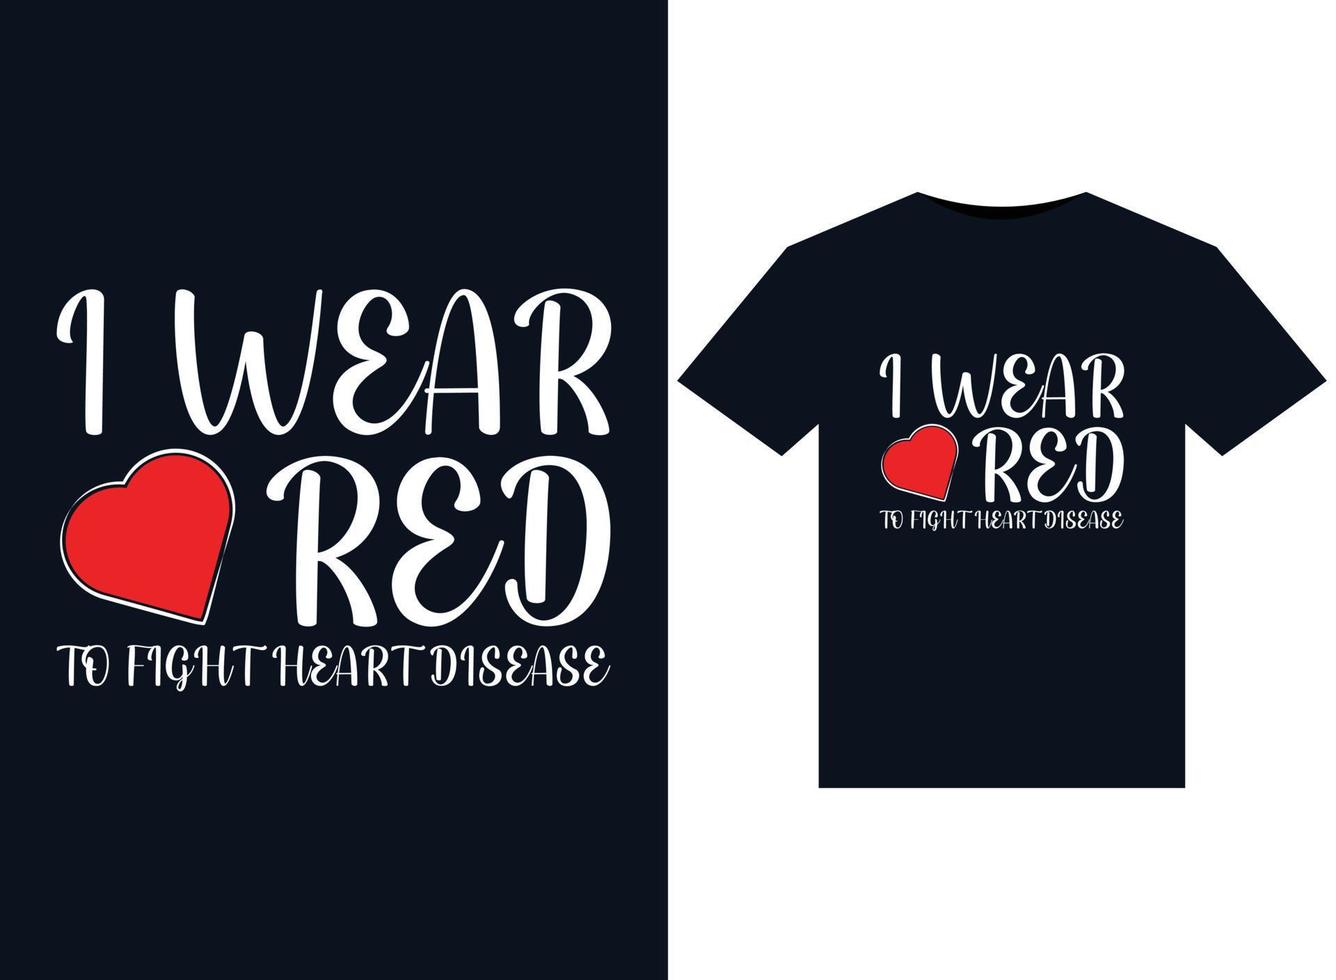 I Wear Red To Fight Heart Disease illustrations for print-ready T-Shirts design vector